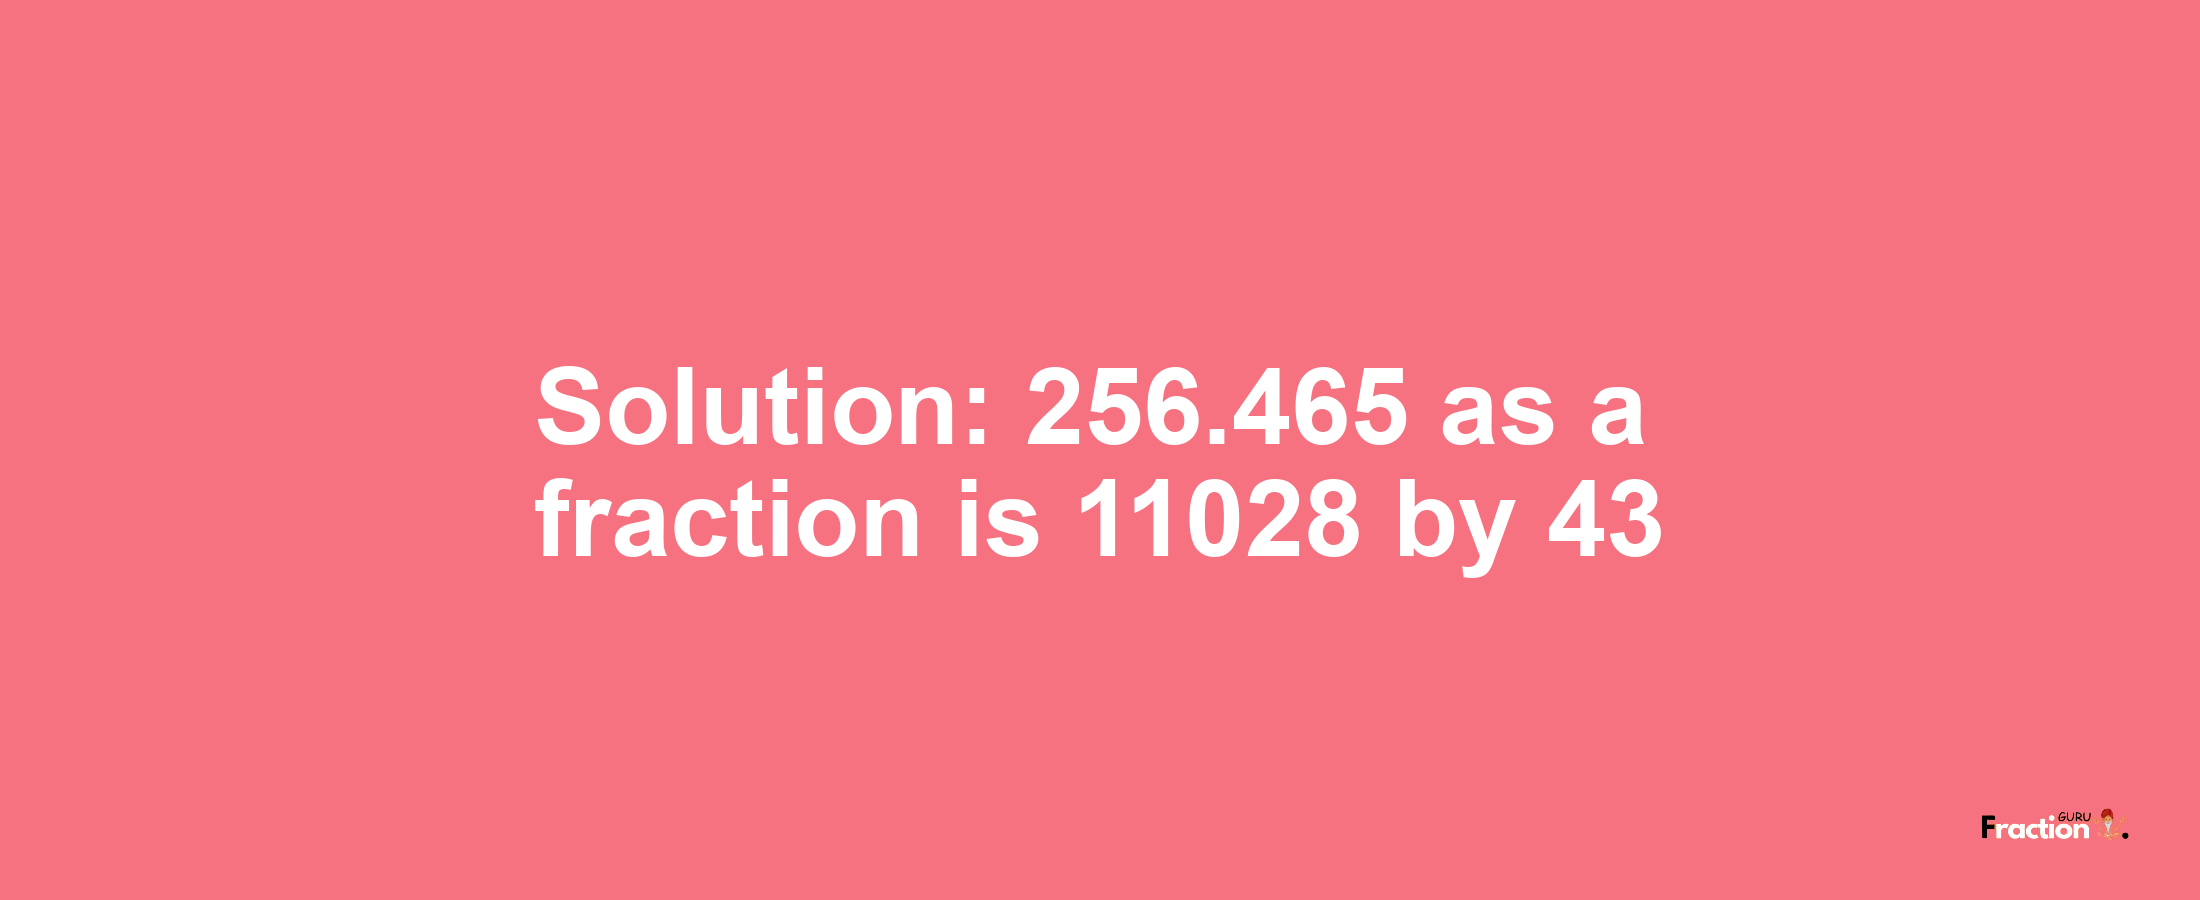 Solution:256.465 as a fraction is 11028/43